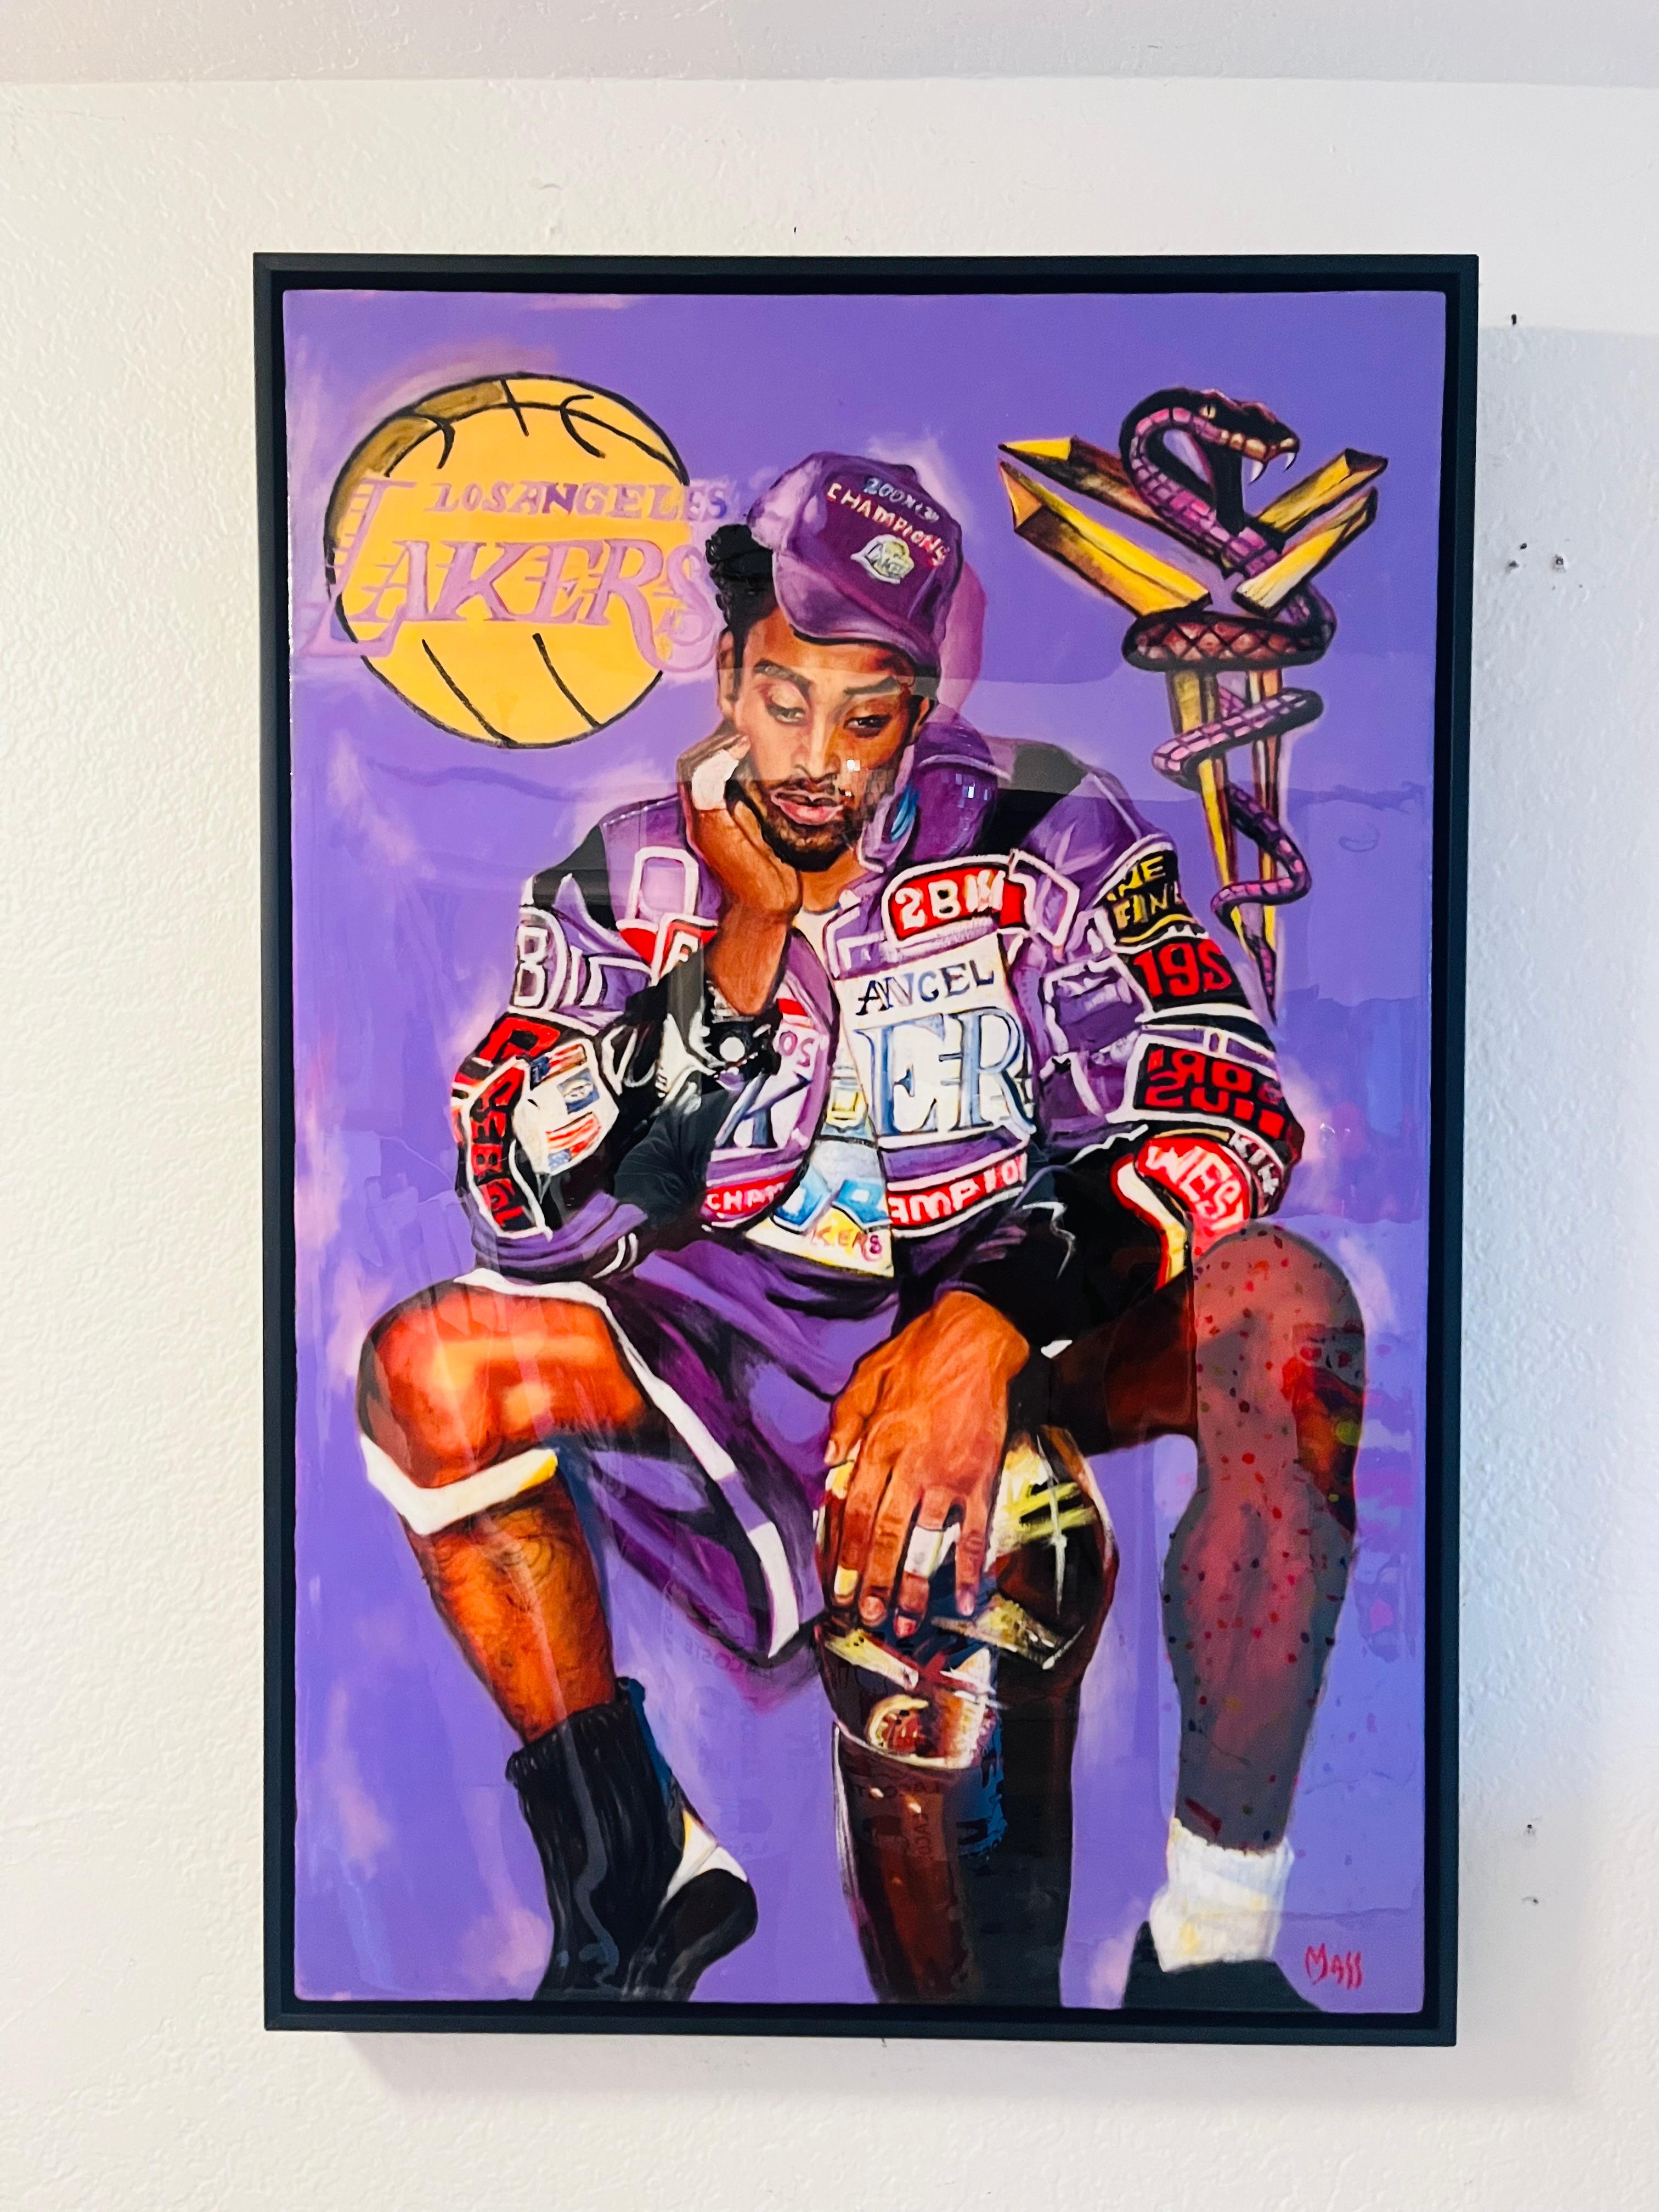 *LIMITED TIME SALE> TAKE ADVANTAGE OF IT!!!

'KING KOBE' by Laura Mass is an awesome portrait of the one and only Kobe Bryant. Filled with details and she was able to capture his essence. A true homage to the Lakers and to one of the greatest who